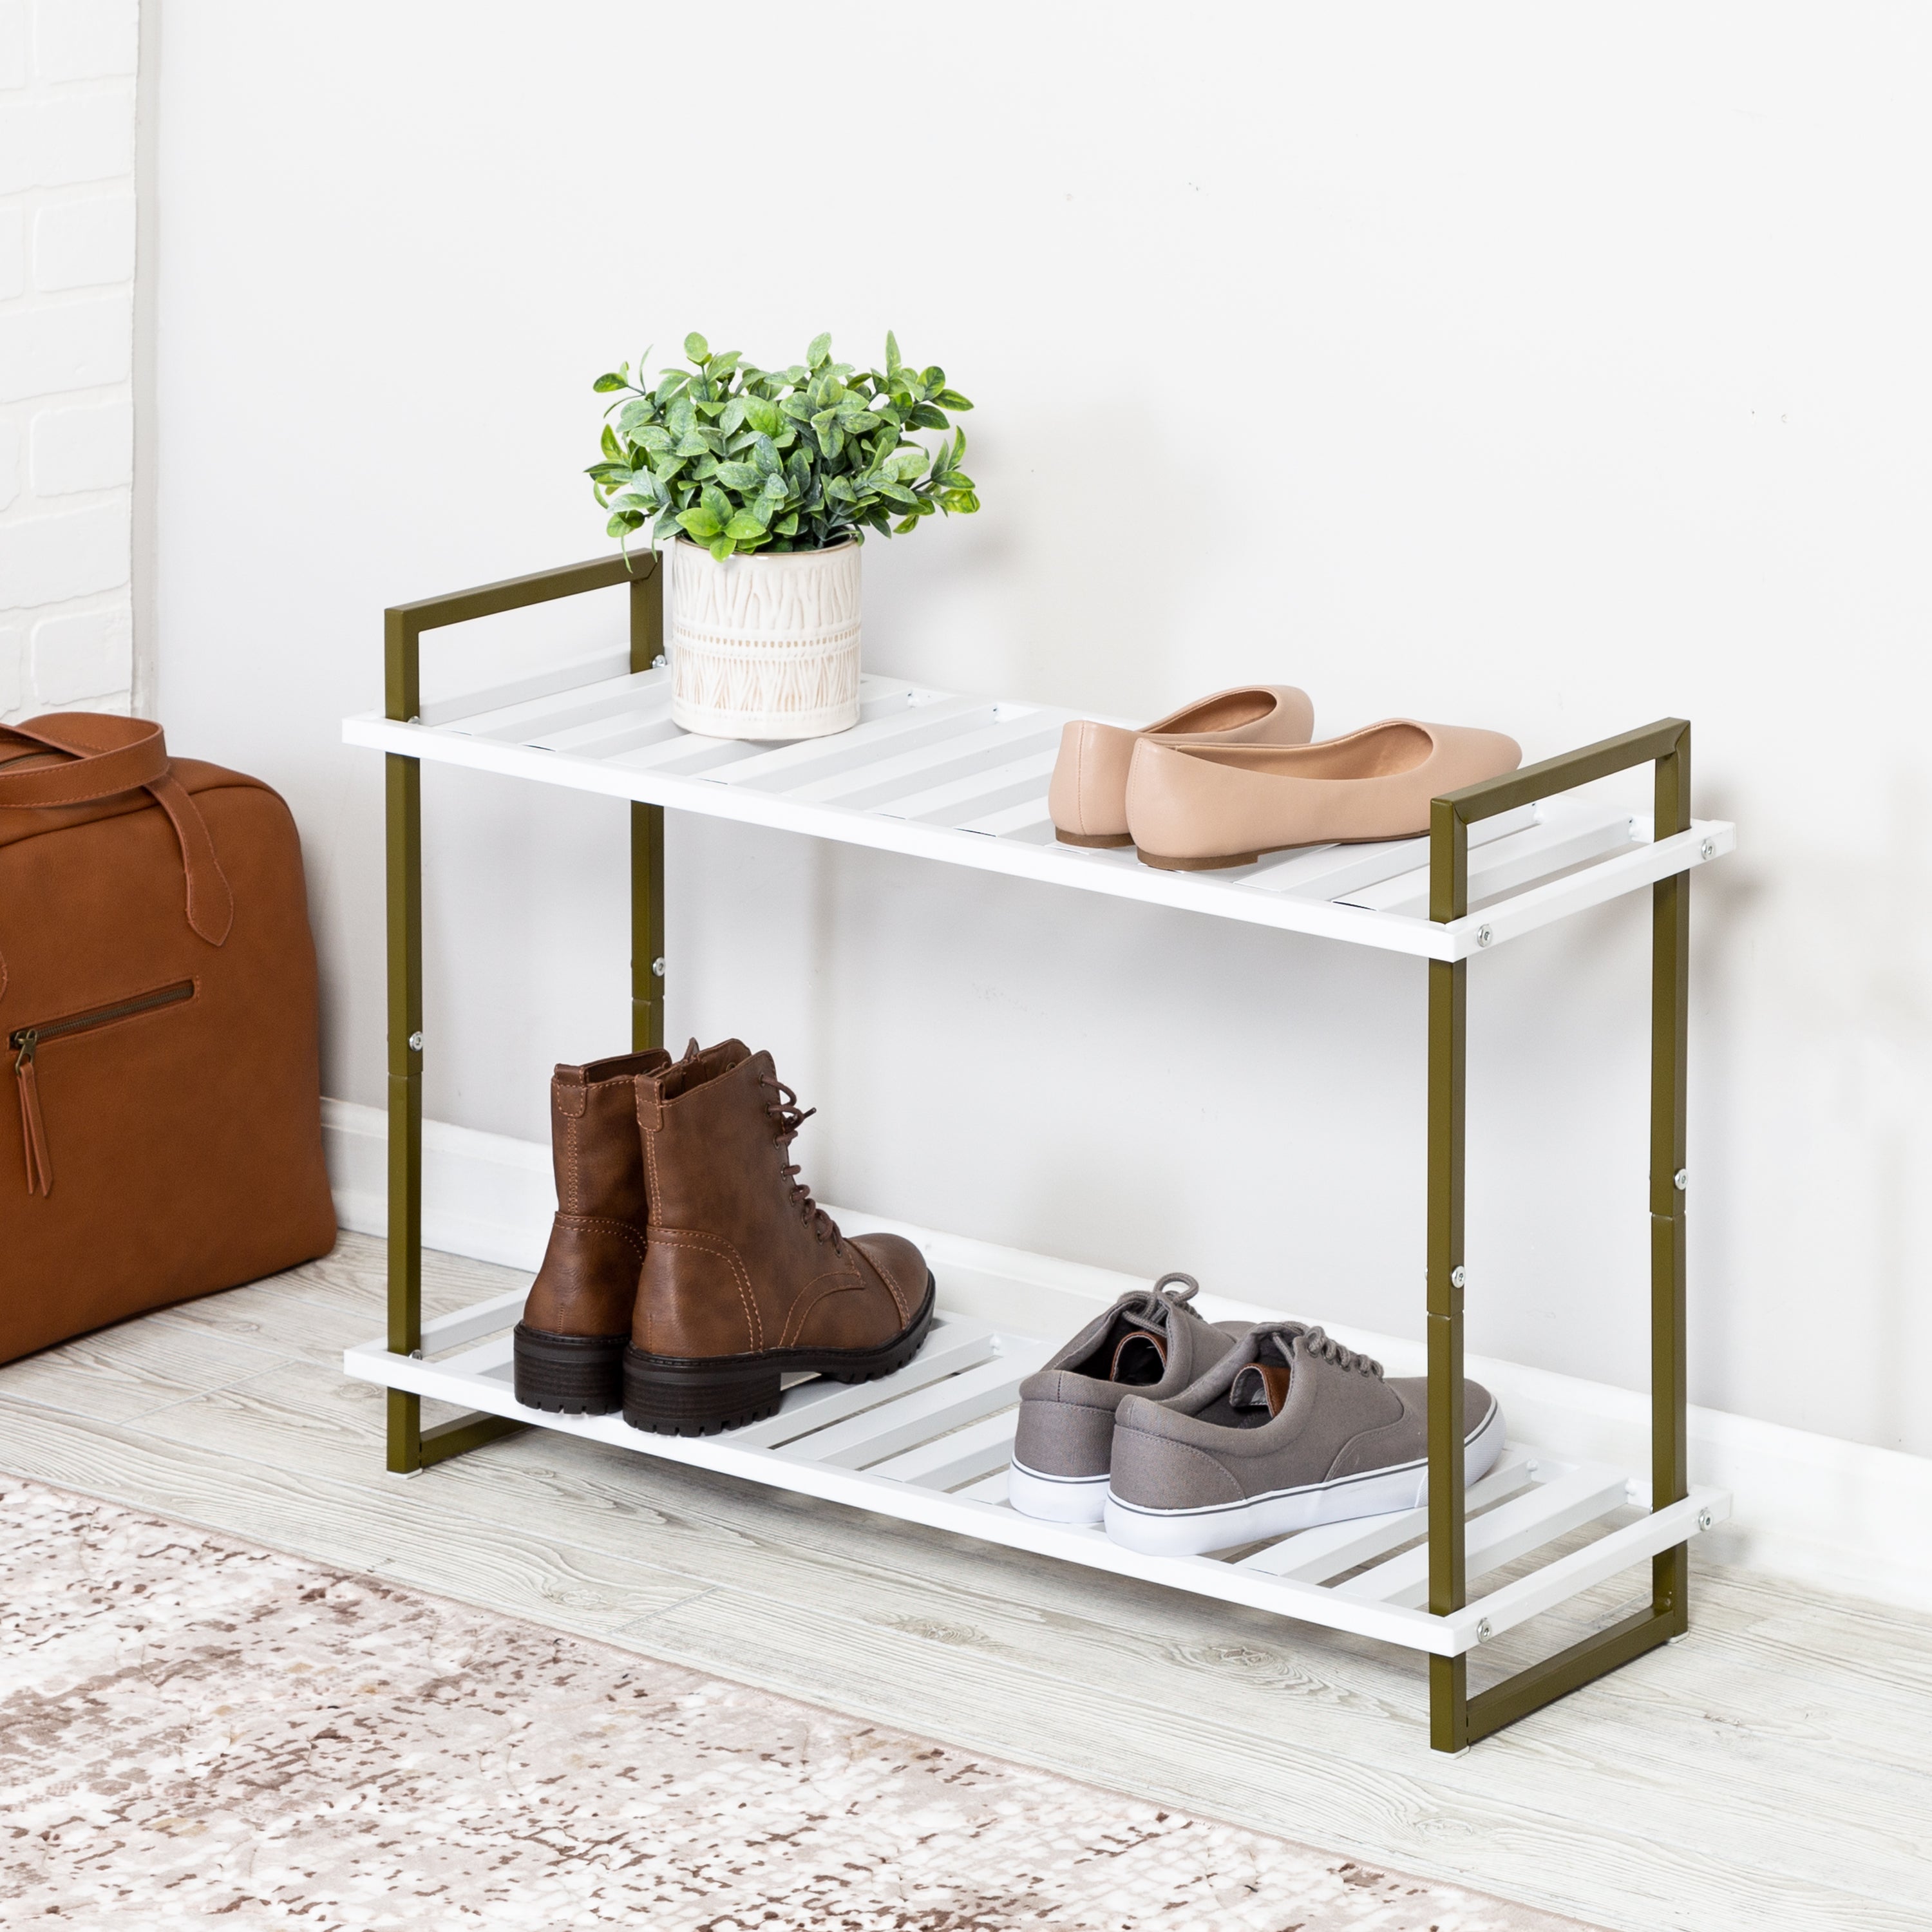 Honey-Can-Do 2-Tier Tubular Metal Shoe Rack - Olive and White